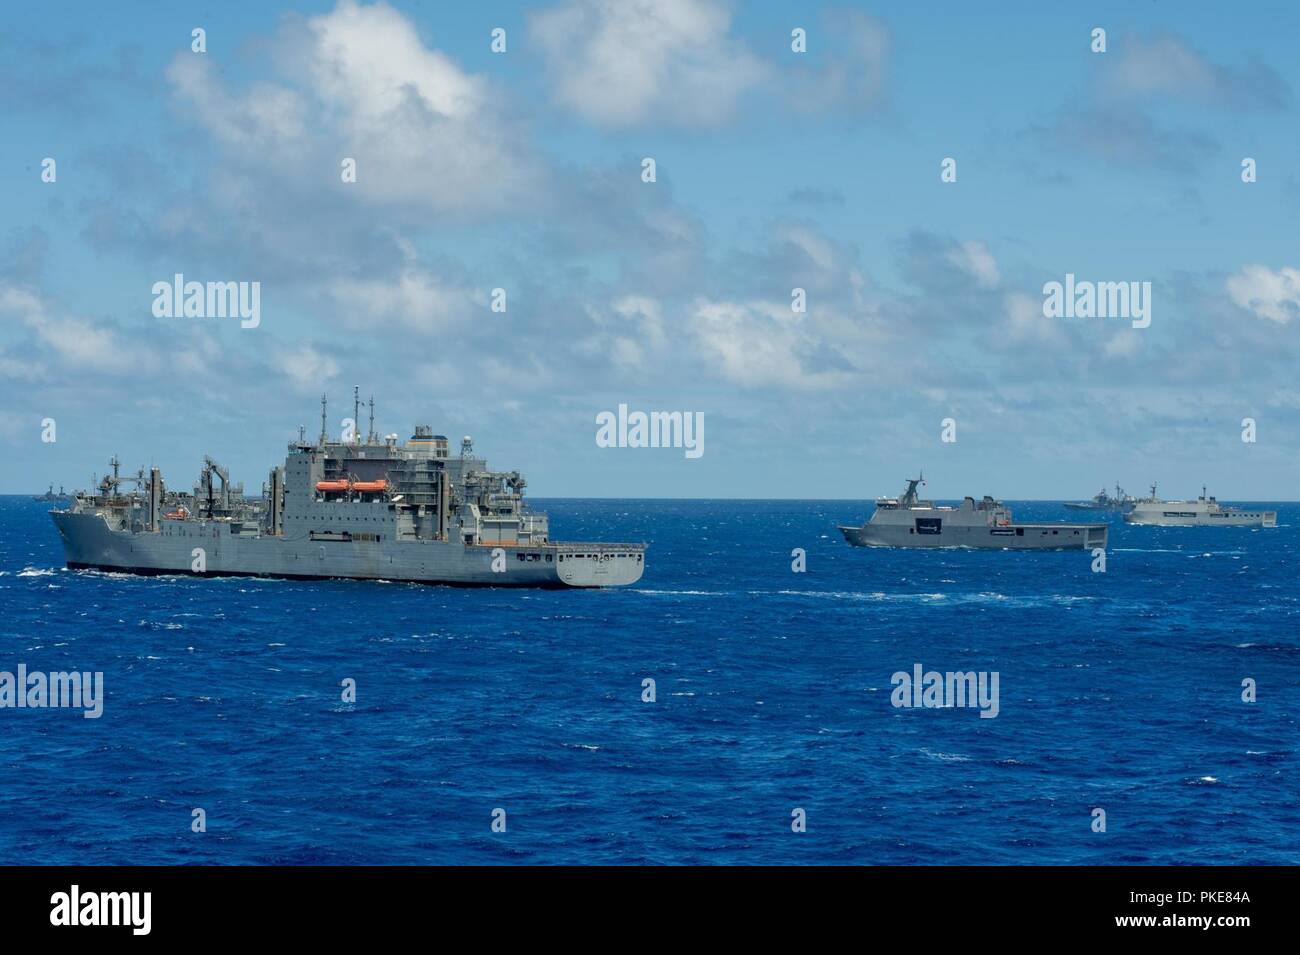 PACIFIC OCEAN (July 26, 2018) Military Sealift Command (MSC) auxiliary dry cargo and ammunition ship USNS Carl Brashear (T-AKE 7), Philippine Navy landing platform dock BRP Davao Del Sur (LD 602), Republic of Indonesia Navy landing dock ship KRI Makassar (590) and guided-missile cruiser USS Lake Erie (CG 70) steam in formation during Rim of the Pacific (RIMPAC) photo exercise, July 26. Twenty-five nations, 46 ships, five submarines, about 200 aircraft, and 25,000 personnel are participating in RIMPAC from June 27 to Aug. 2 in and around the Hawaiian Islands and Southern California. The world’s Stock Photo